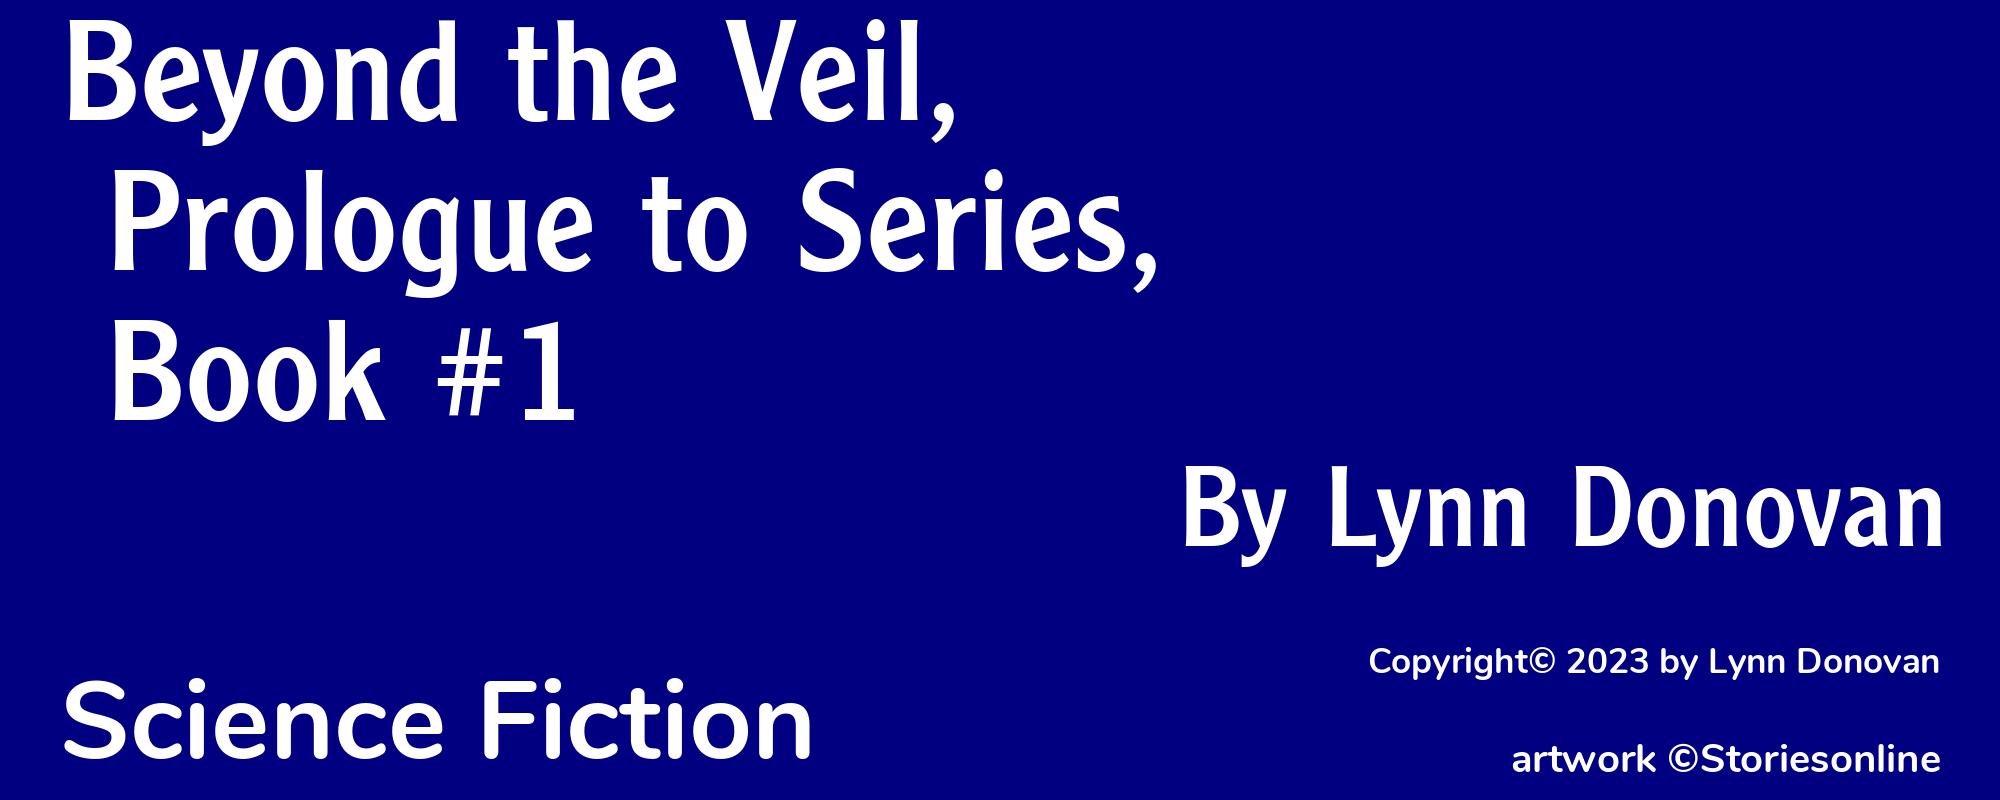 Beyond the Veil, Prologue to Series, Book #1 - Cover